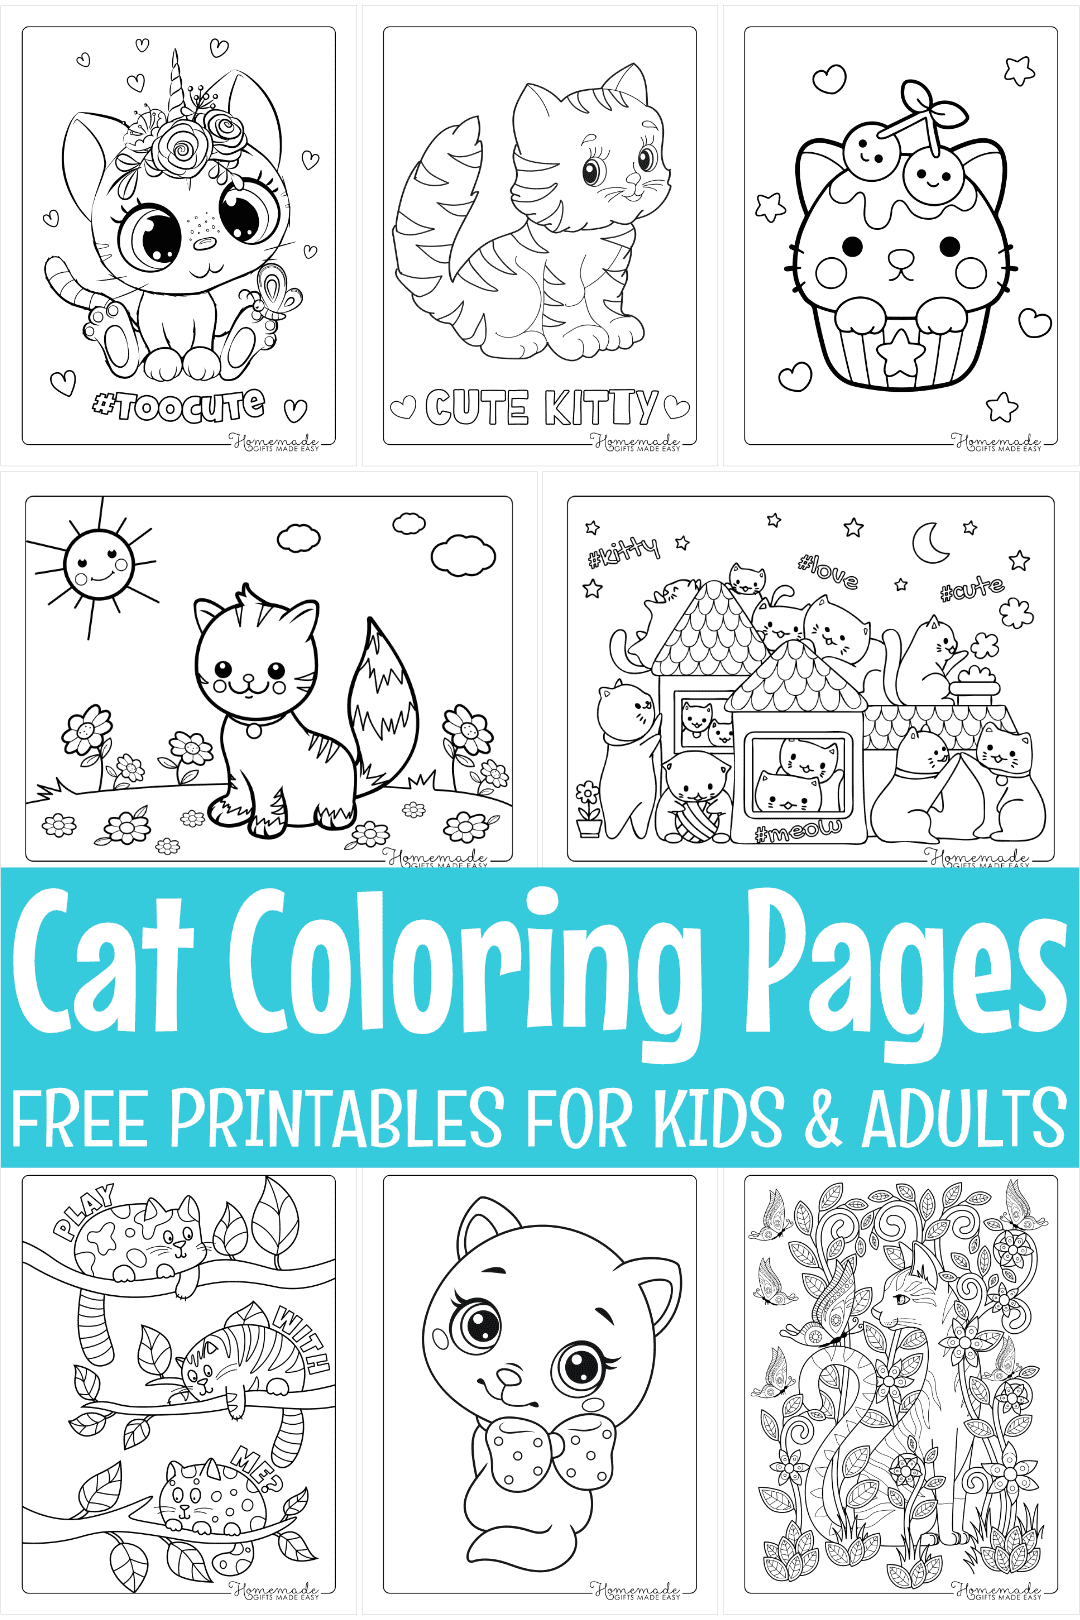 Super Kitties coloring Pages: Gift Printable For Kids for /All Ages 3-8 8-12